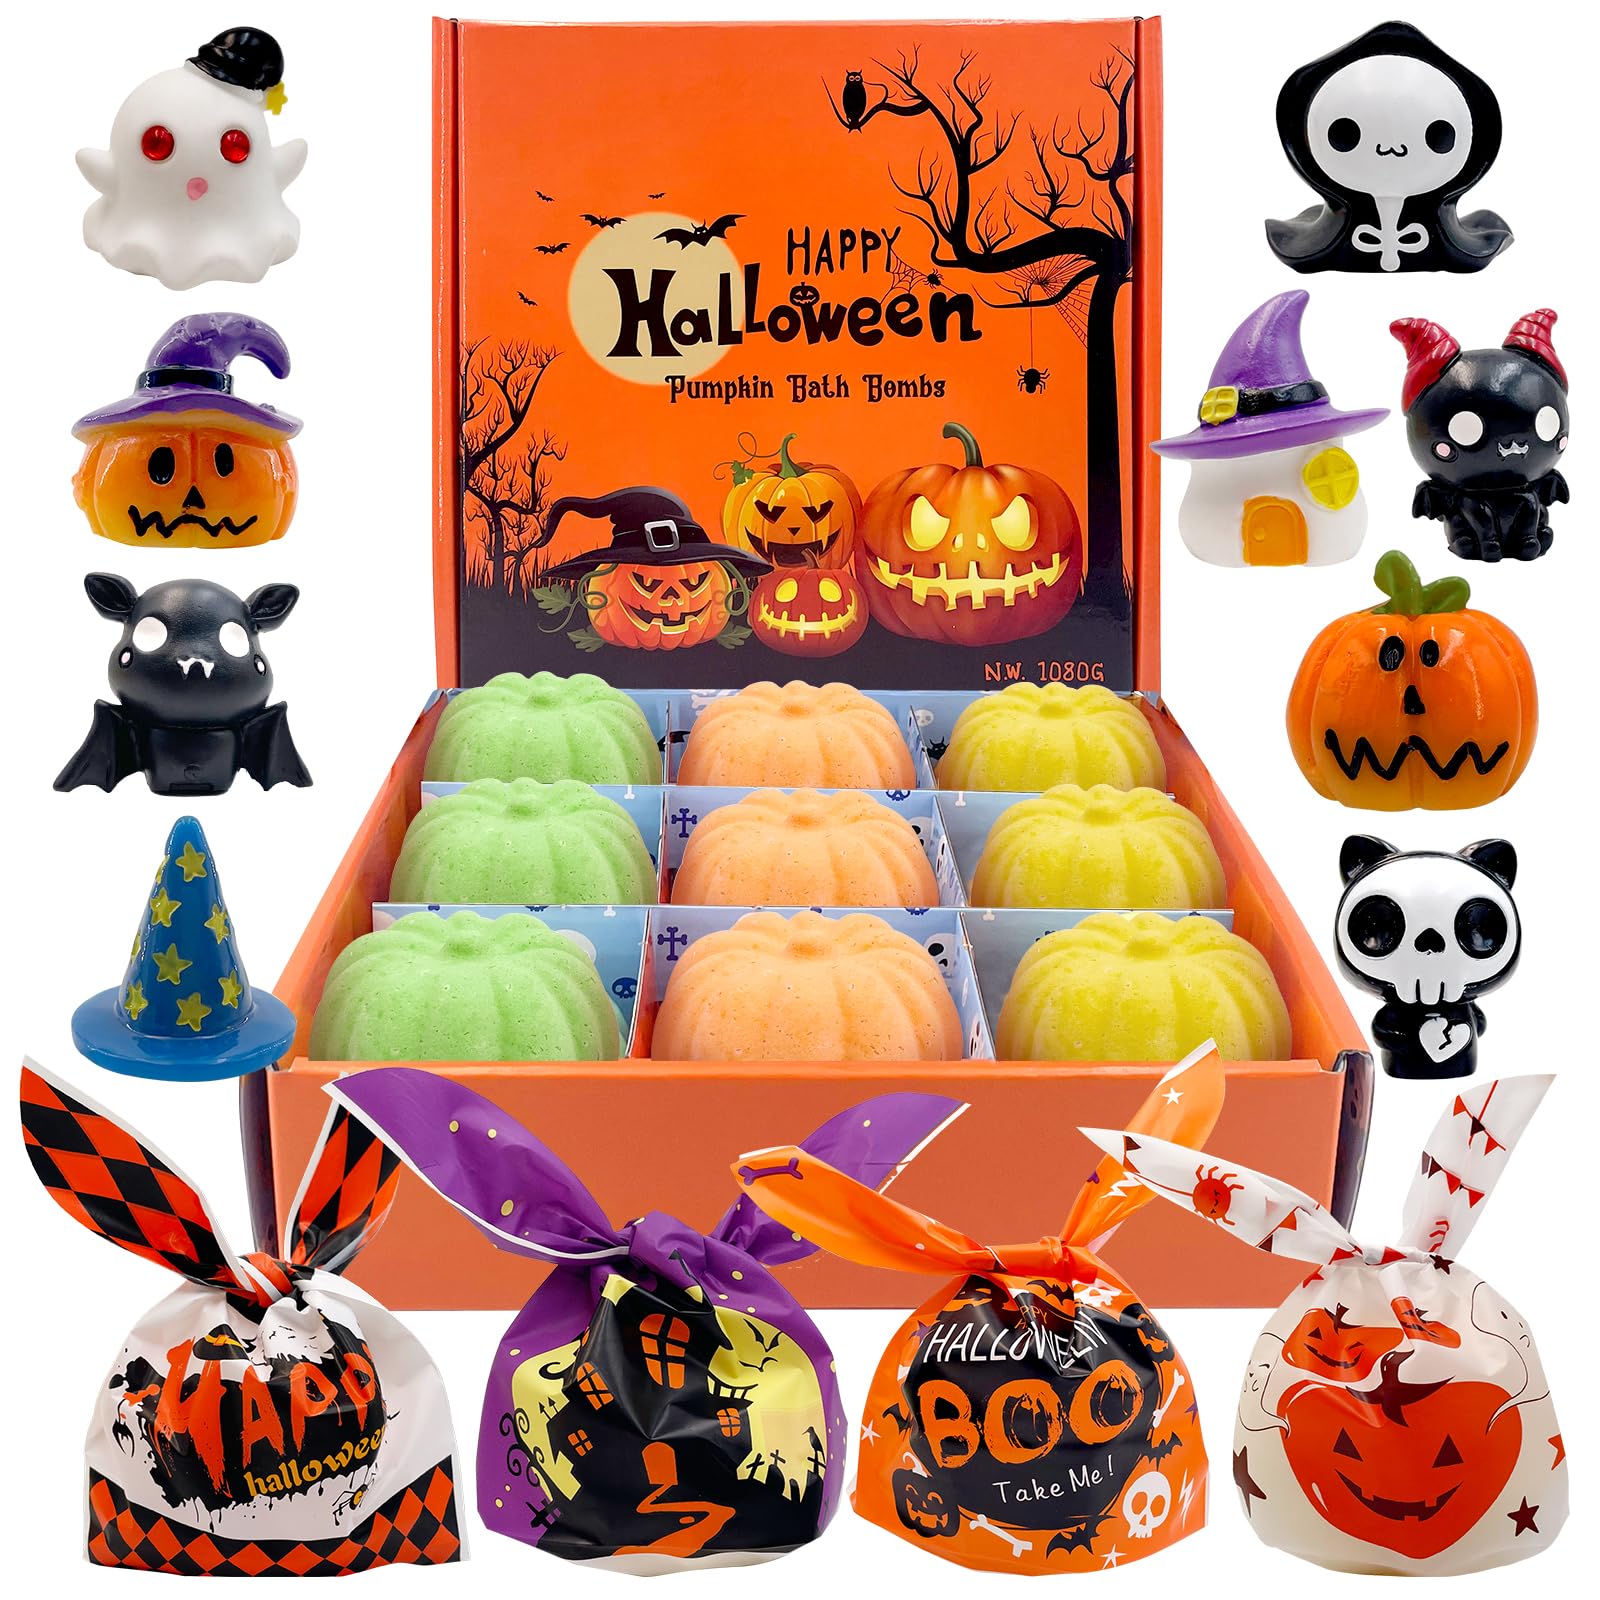 Halloween Bath Bombs with Spooky Toys Inside for Kids, Halloween Party Favors for Kids with Surprise Inside, Hugh Pumpkin Bath Bombs for Kids with Surprise Inside,